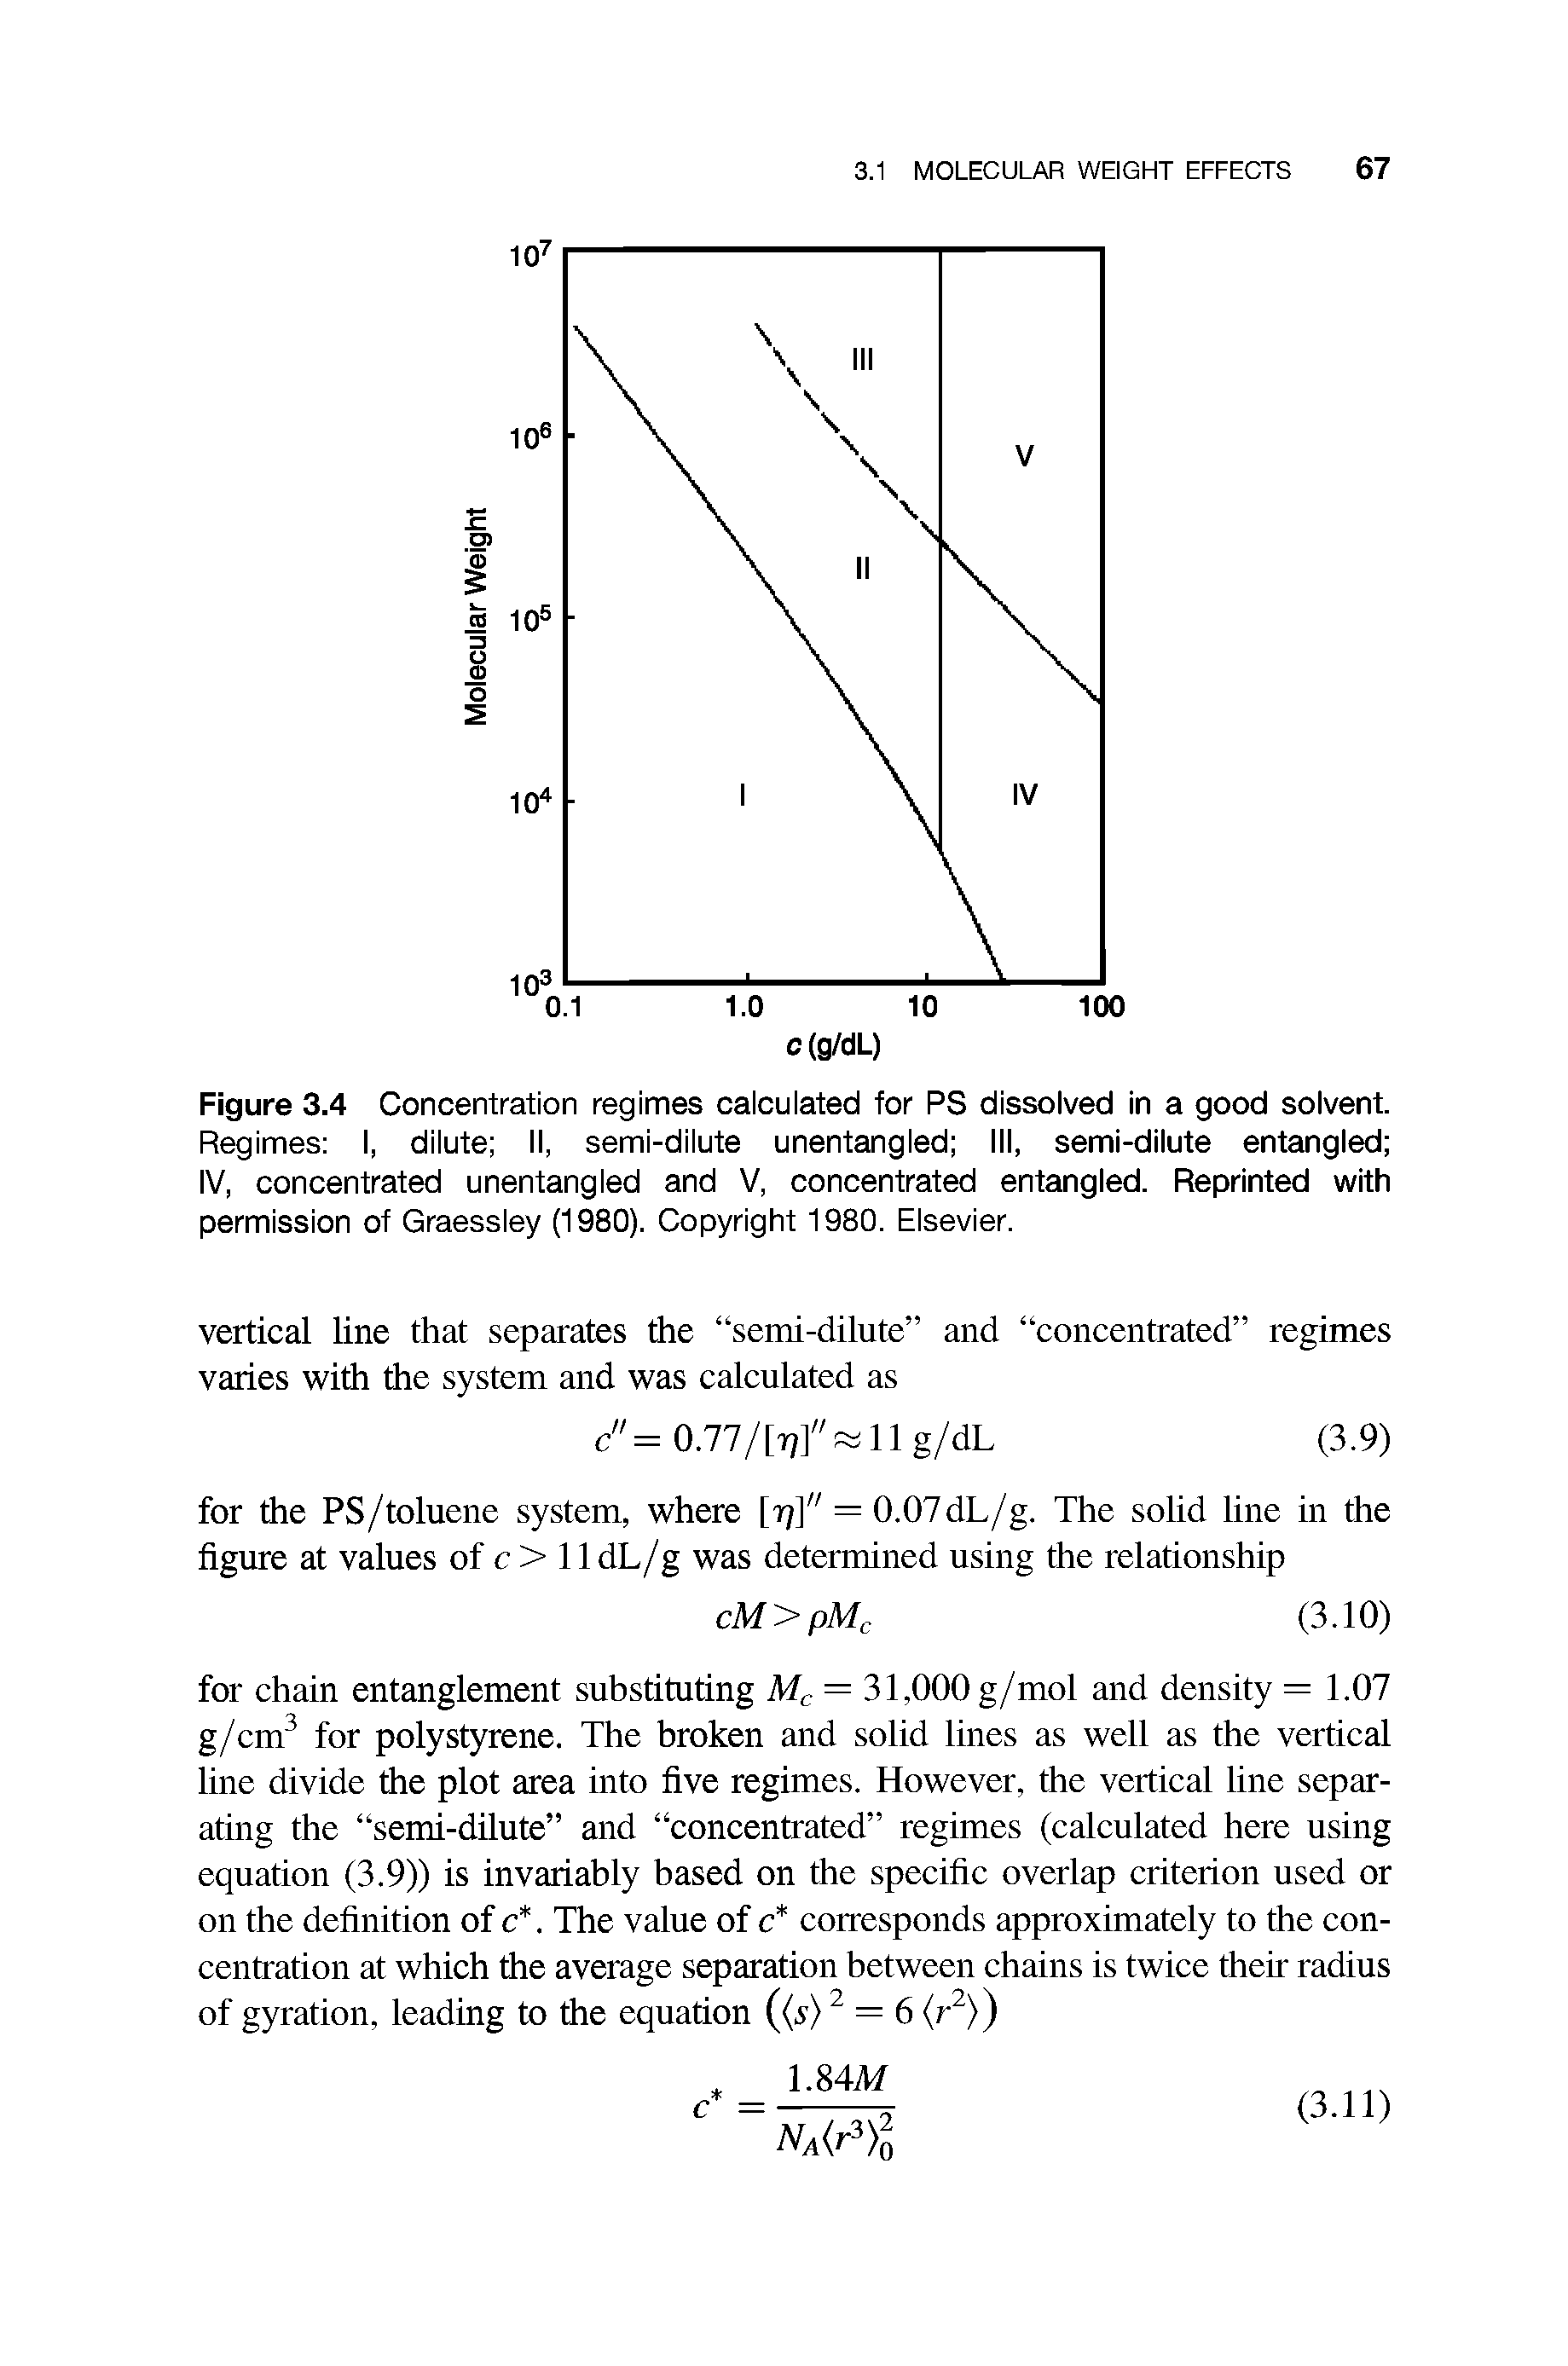 Figure 3.4 Concentration regimes oaicuiated for PS dissolved in a good solvent. Regimes I, diiute II, semi-dilute unentangled III, semi-dilute entangled IV, concentrated unentangled and V, concentrated entangled. Reprinted with permission of Graessley (1980). Copyright 1980. Elsevier.